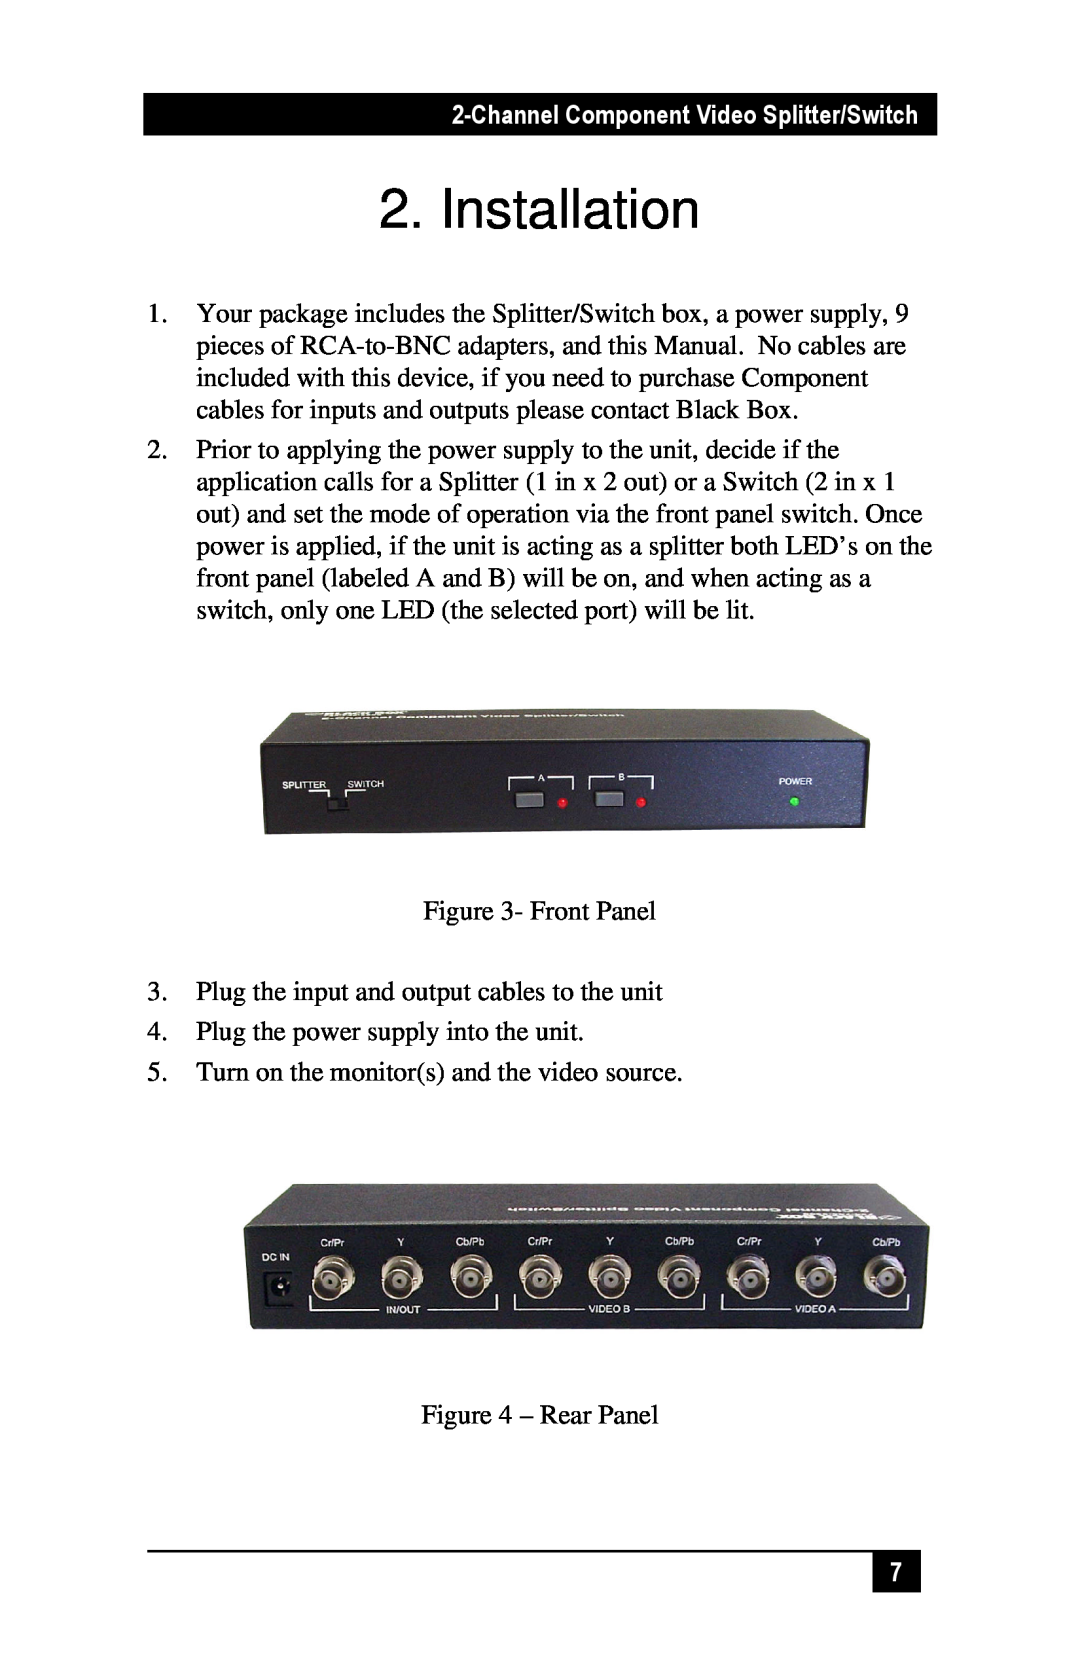 Black Box AC1030A, 2-Channel Component Video Splitter/Switch manual Installation 